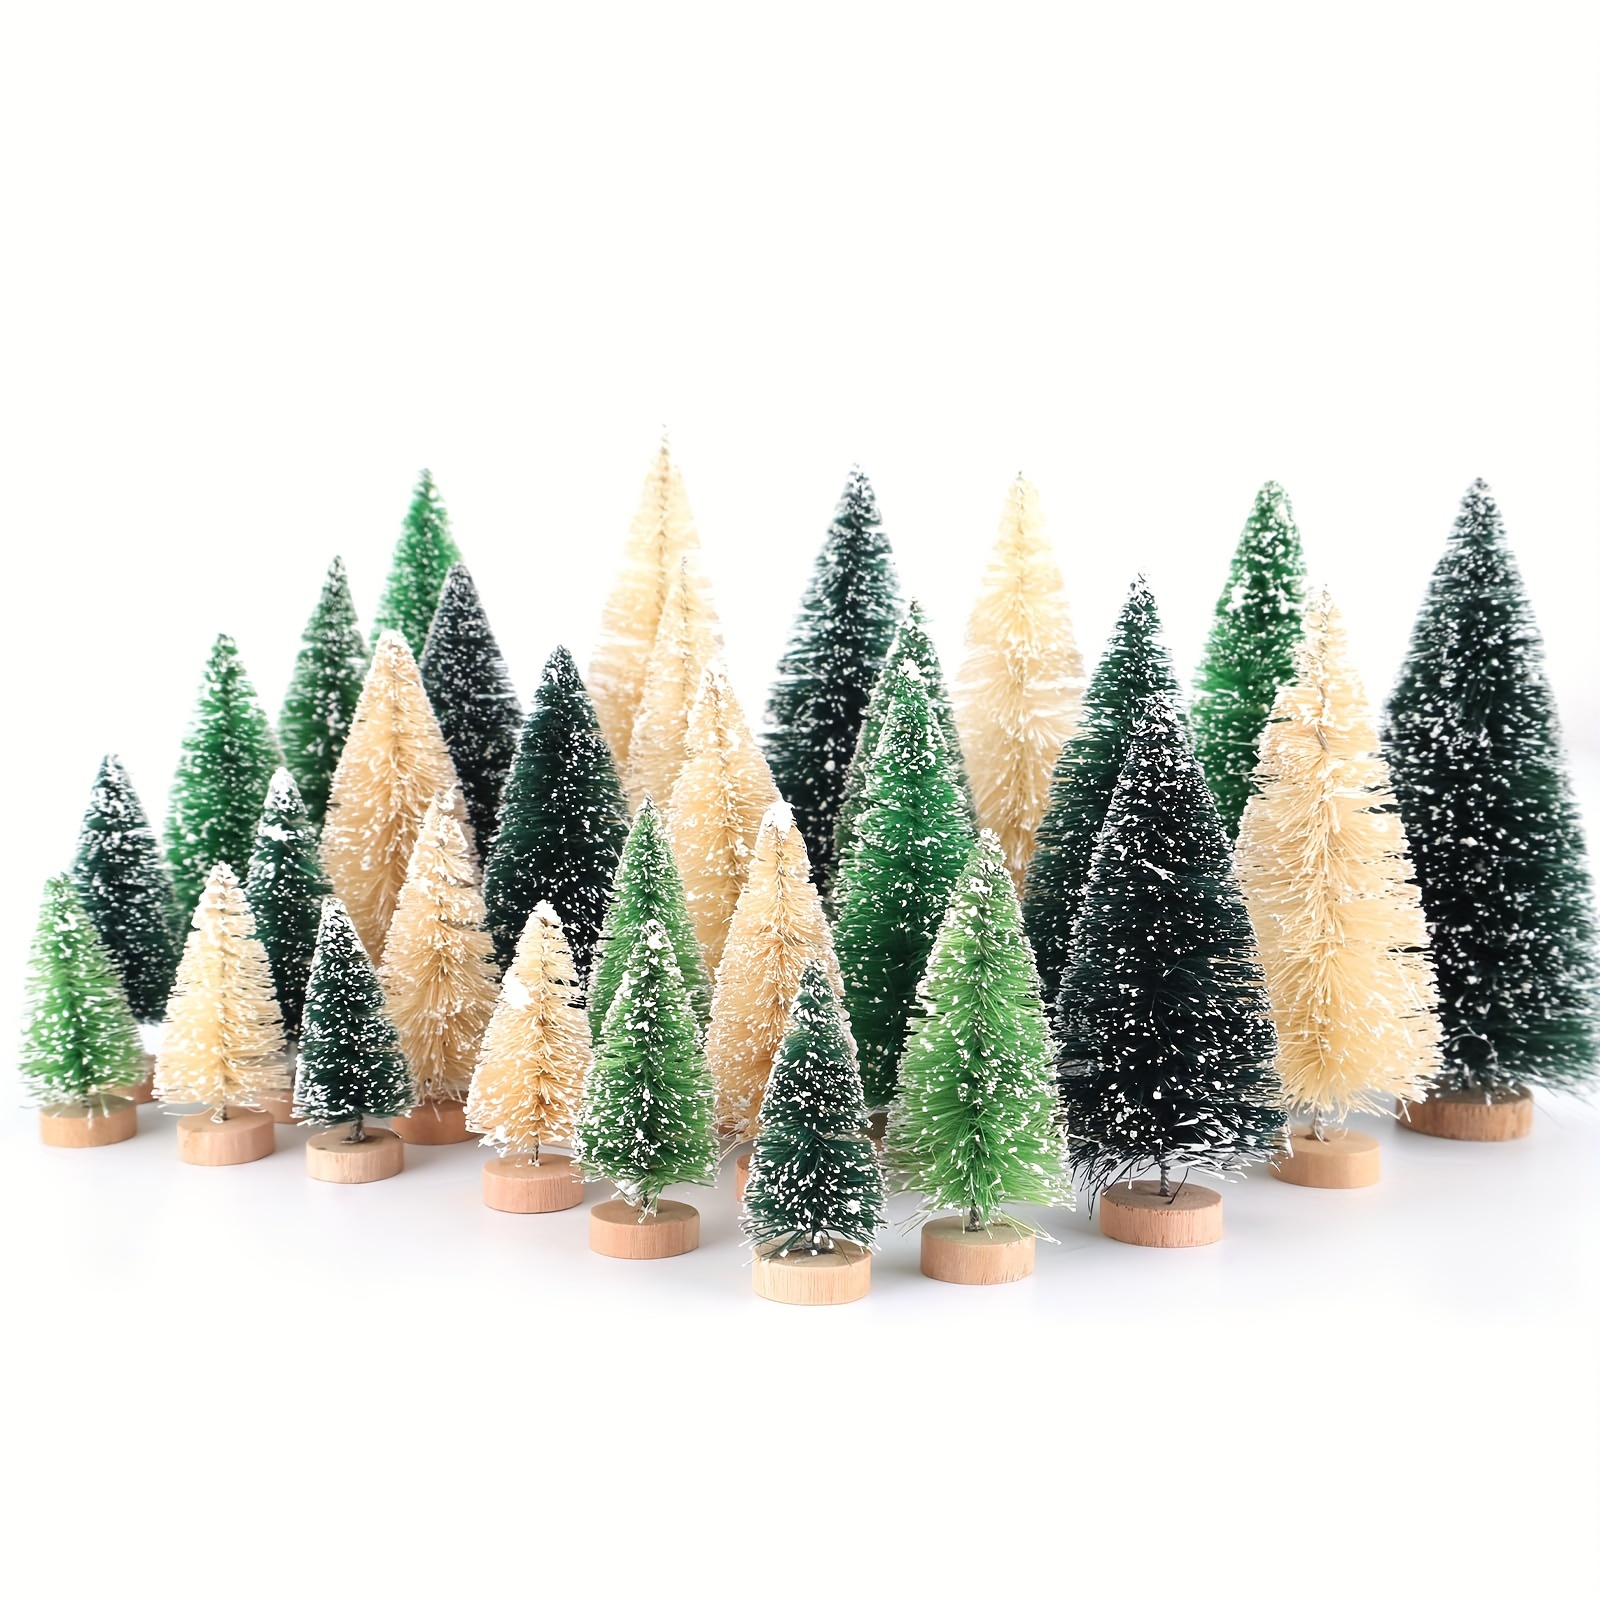 Cones Cone Crafts Craft Tree Christmas White Diy Polystyrene Children Inch  Floral Supplies Cardboard Shape Shapes - AliExpress